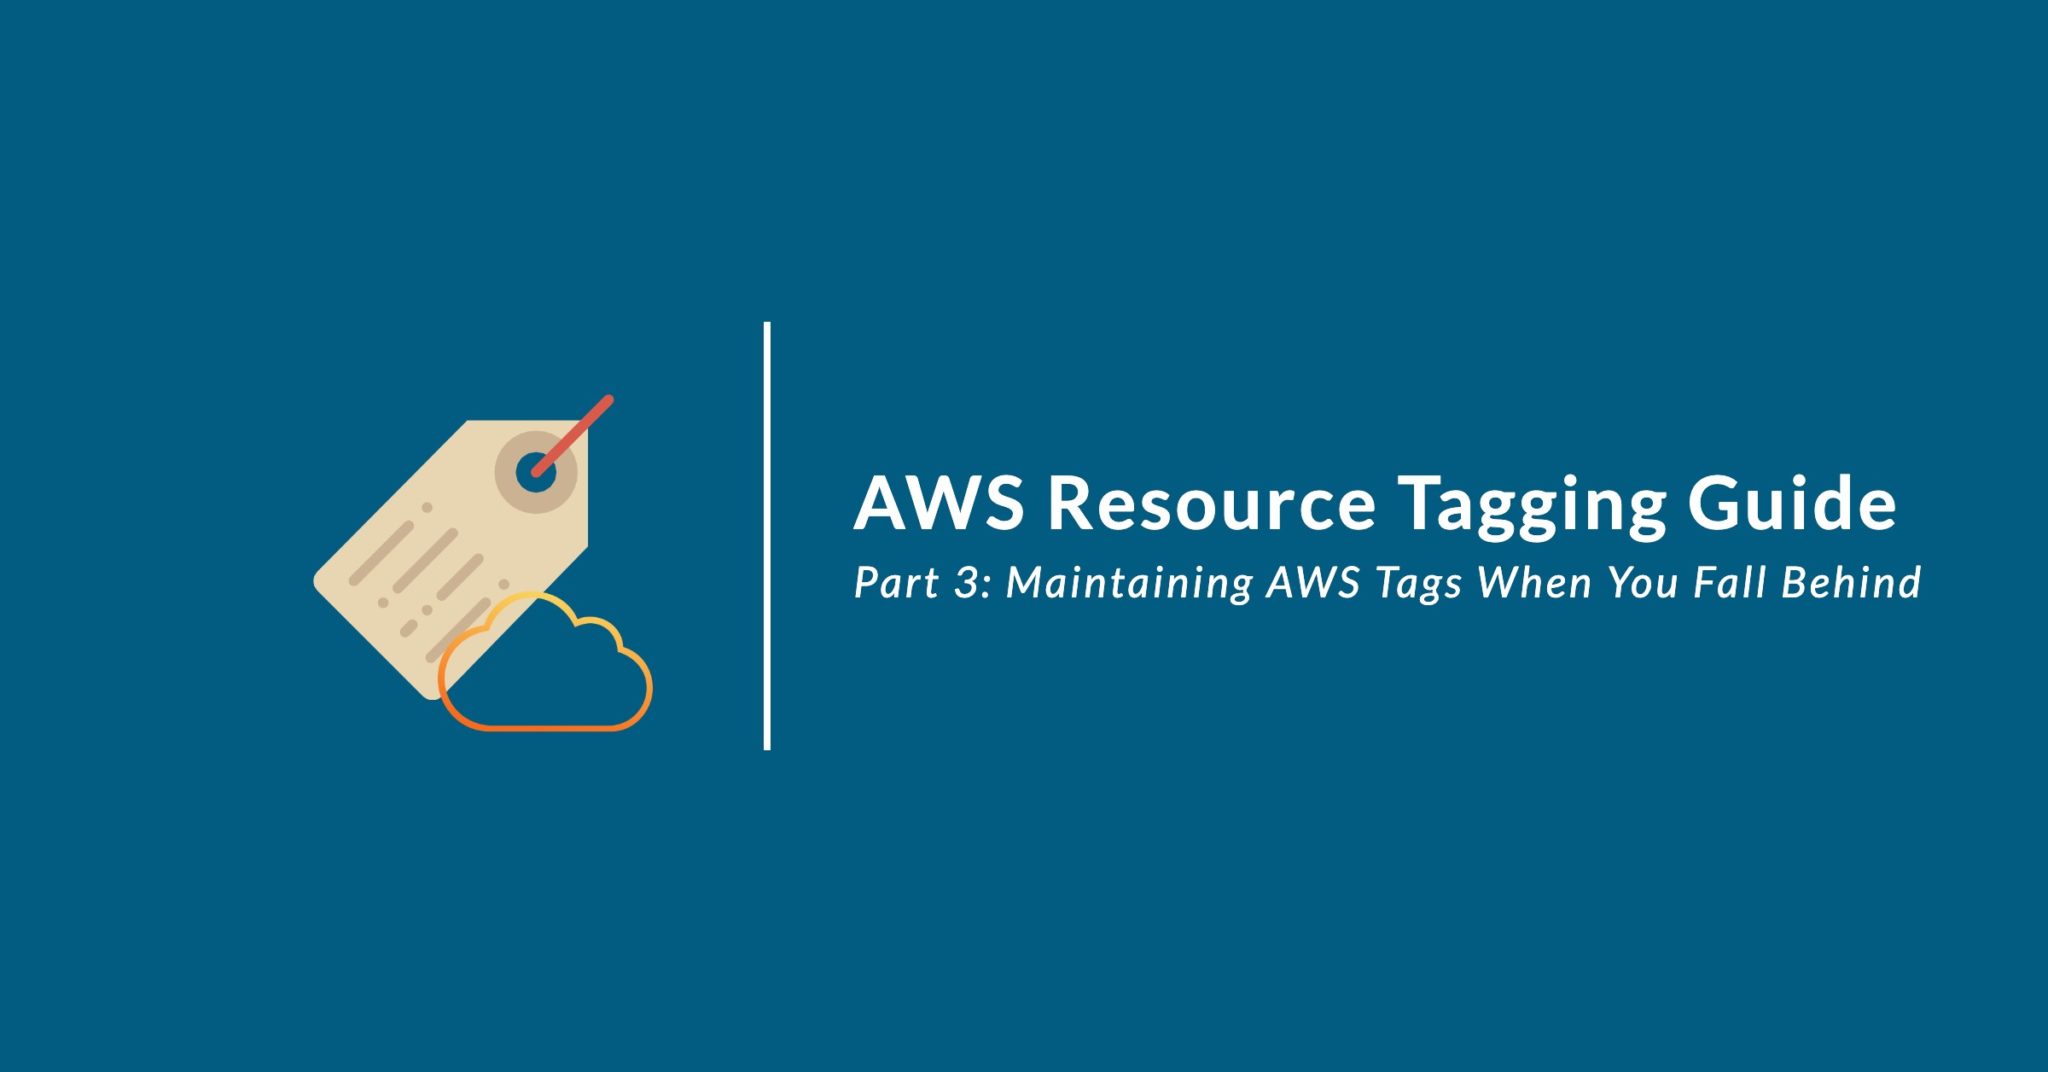 Maintain AWS Tags When You Fall Behind - Part 3150